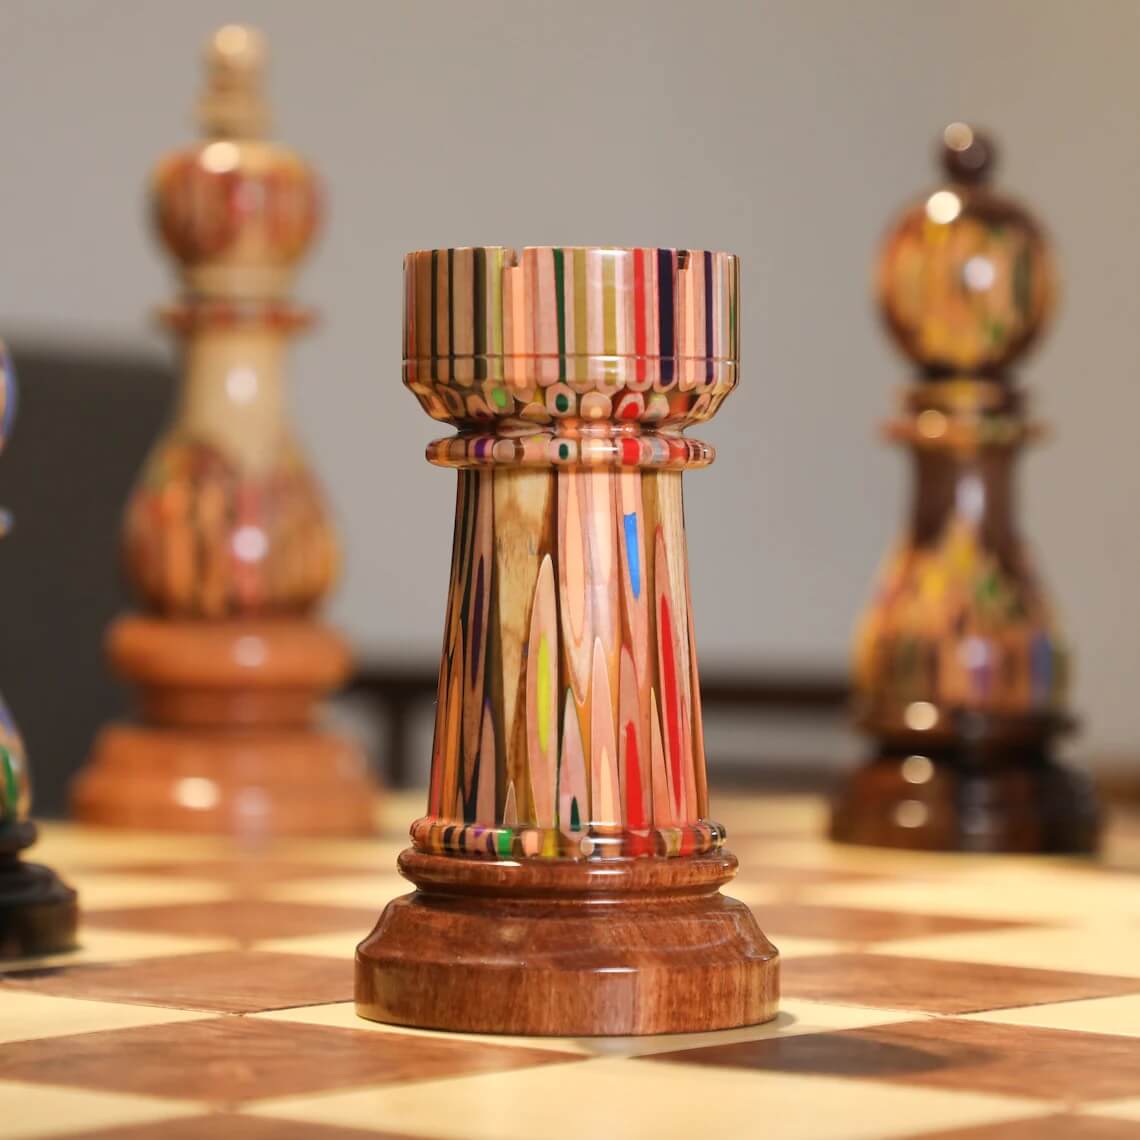 Why is the rook called a 'rook' in chess? Every other piece has a